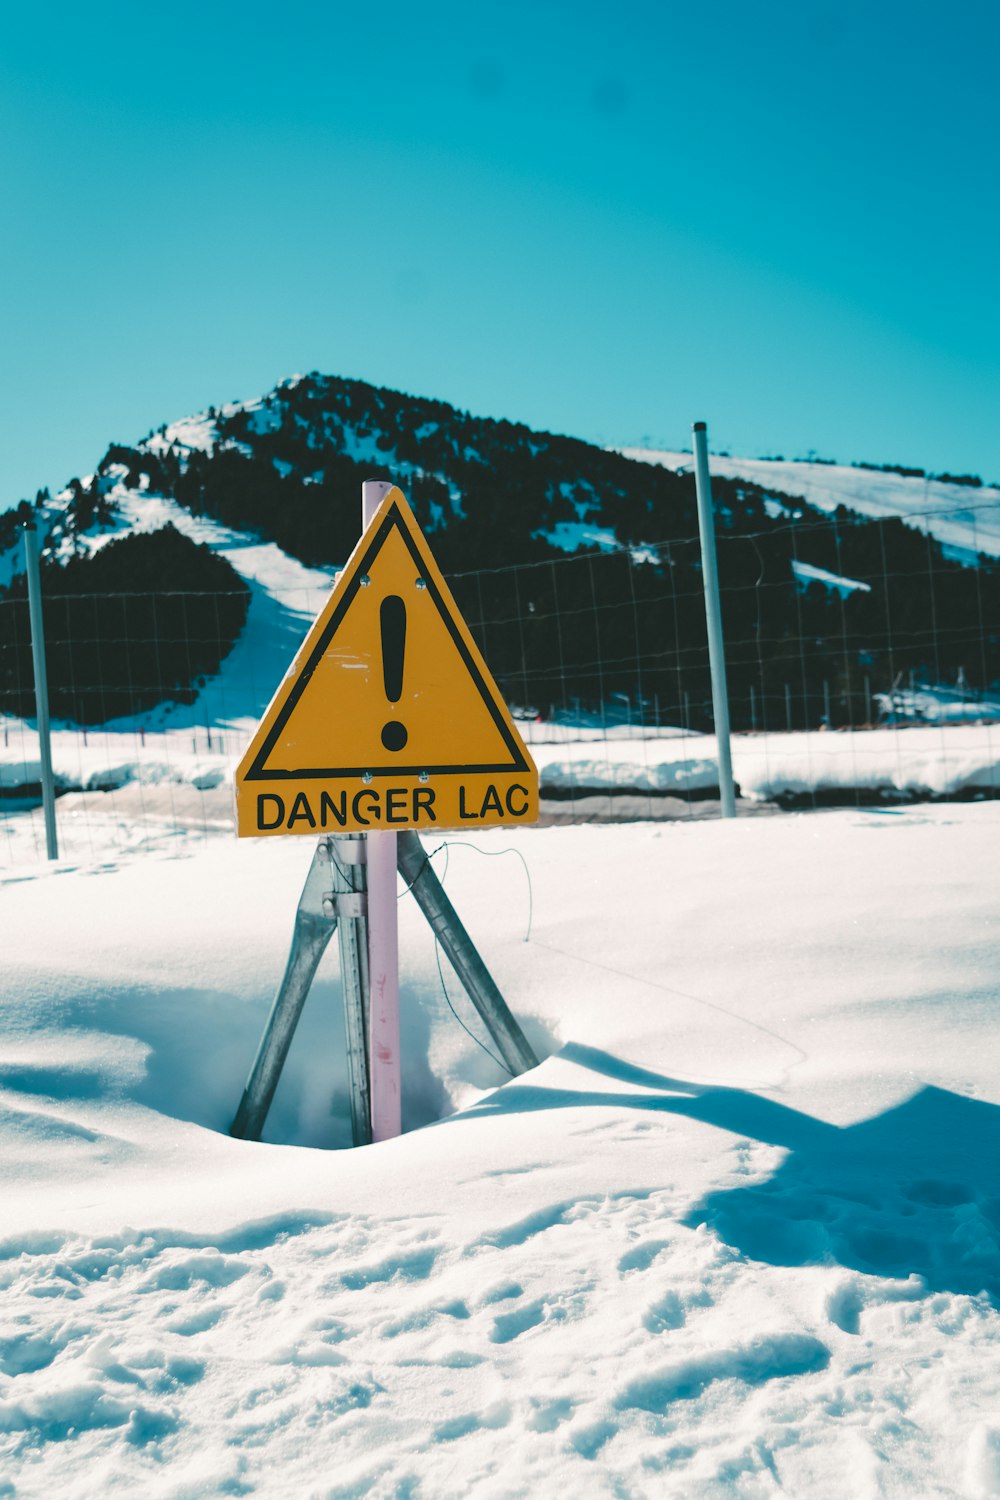 a warning sign in the middle of a snowy field